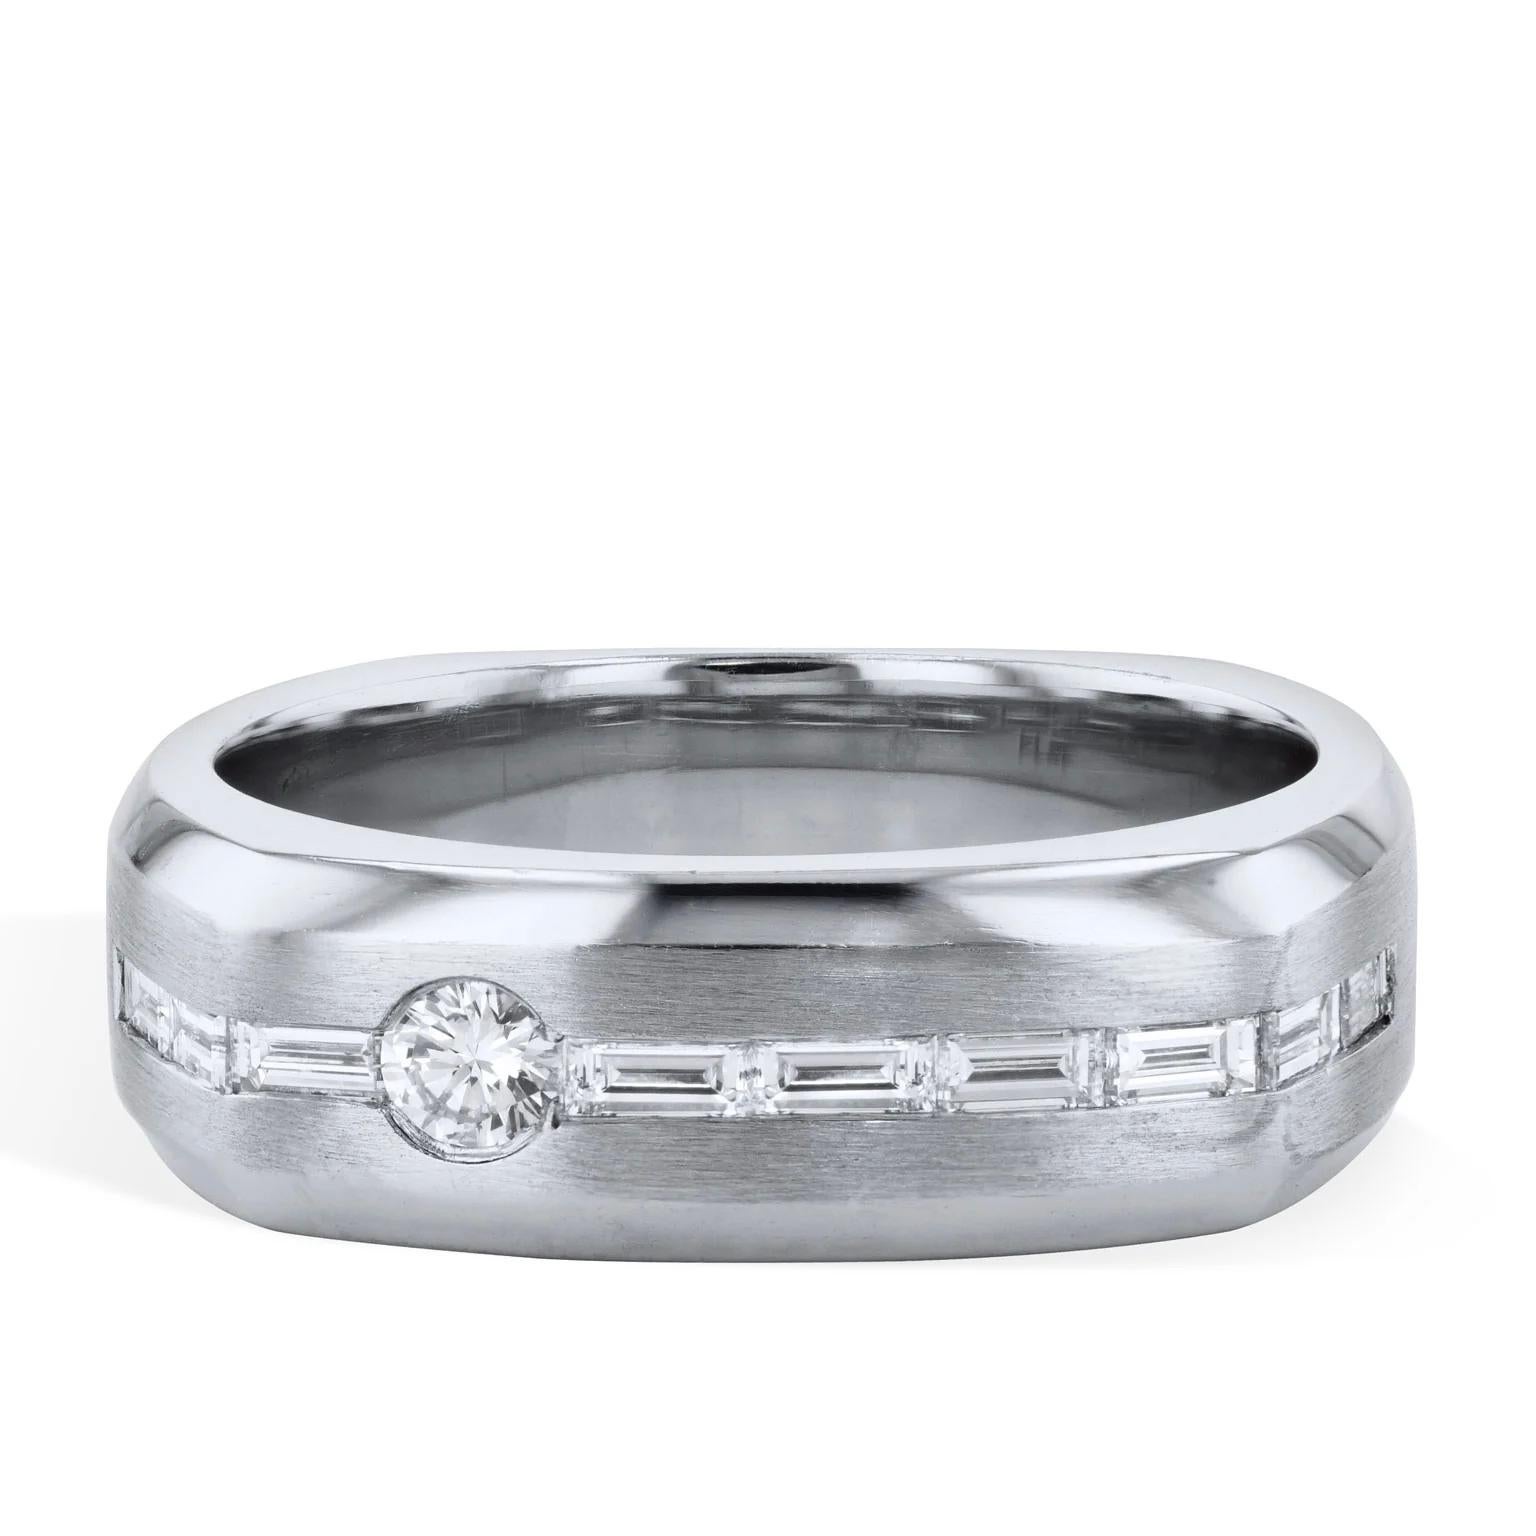 This Platinum and Diamond Men's Ring is simply stunning! Featuring 9 dazzling baguette diamonds, plus a round Brilliant Cut diamond. Handmade by H&H Jewels
Platinum and Diamond Men's Ring
9pcs baguette diamonds 
0.50cts
round Brilliant Cut diamond: